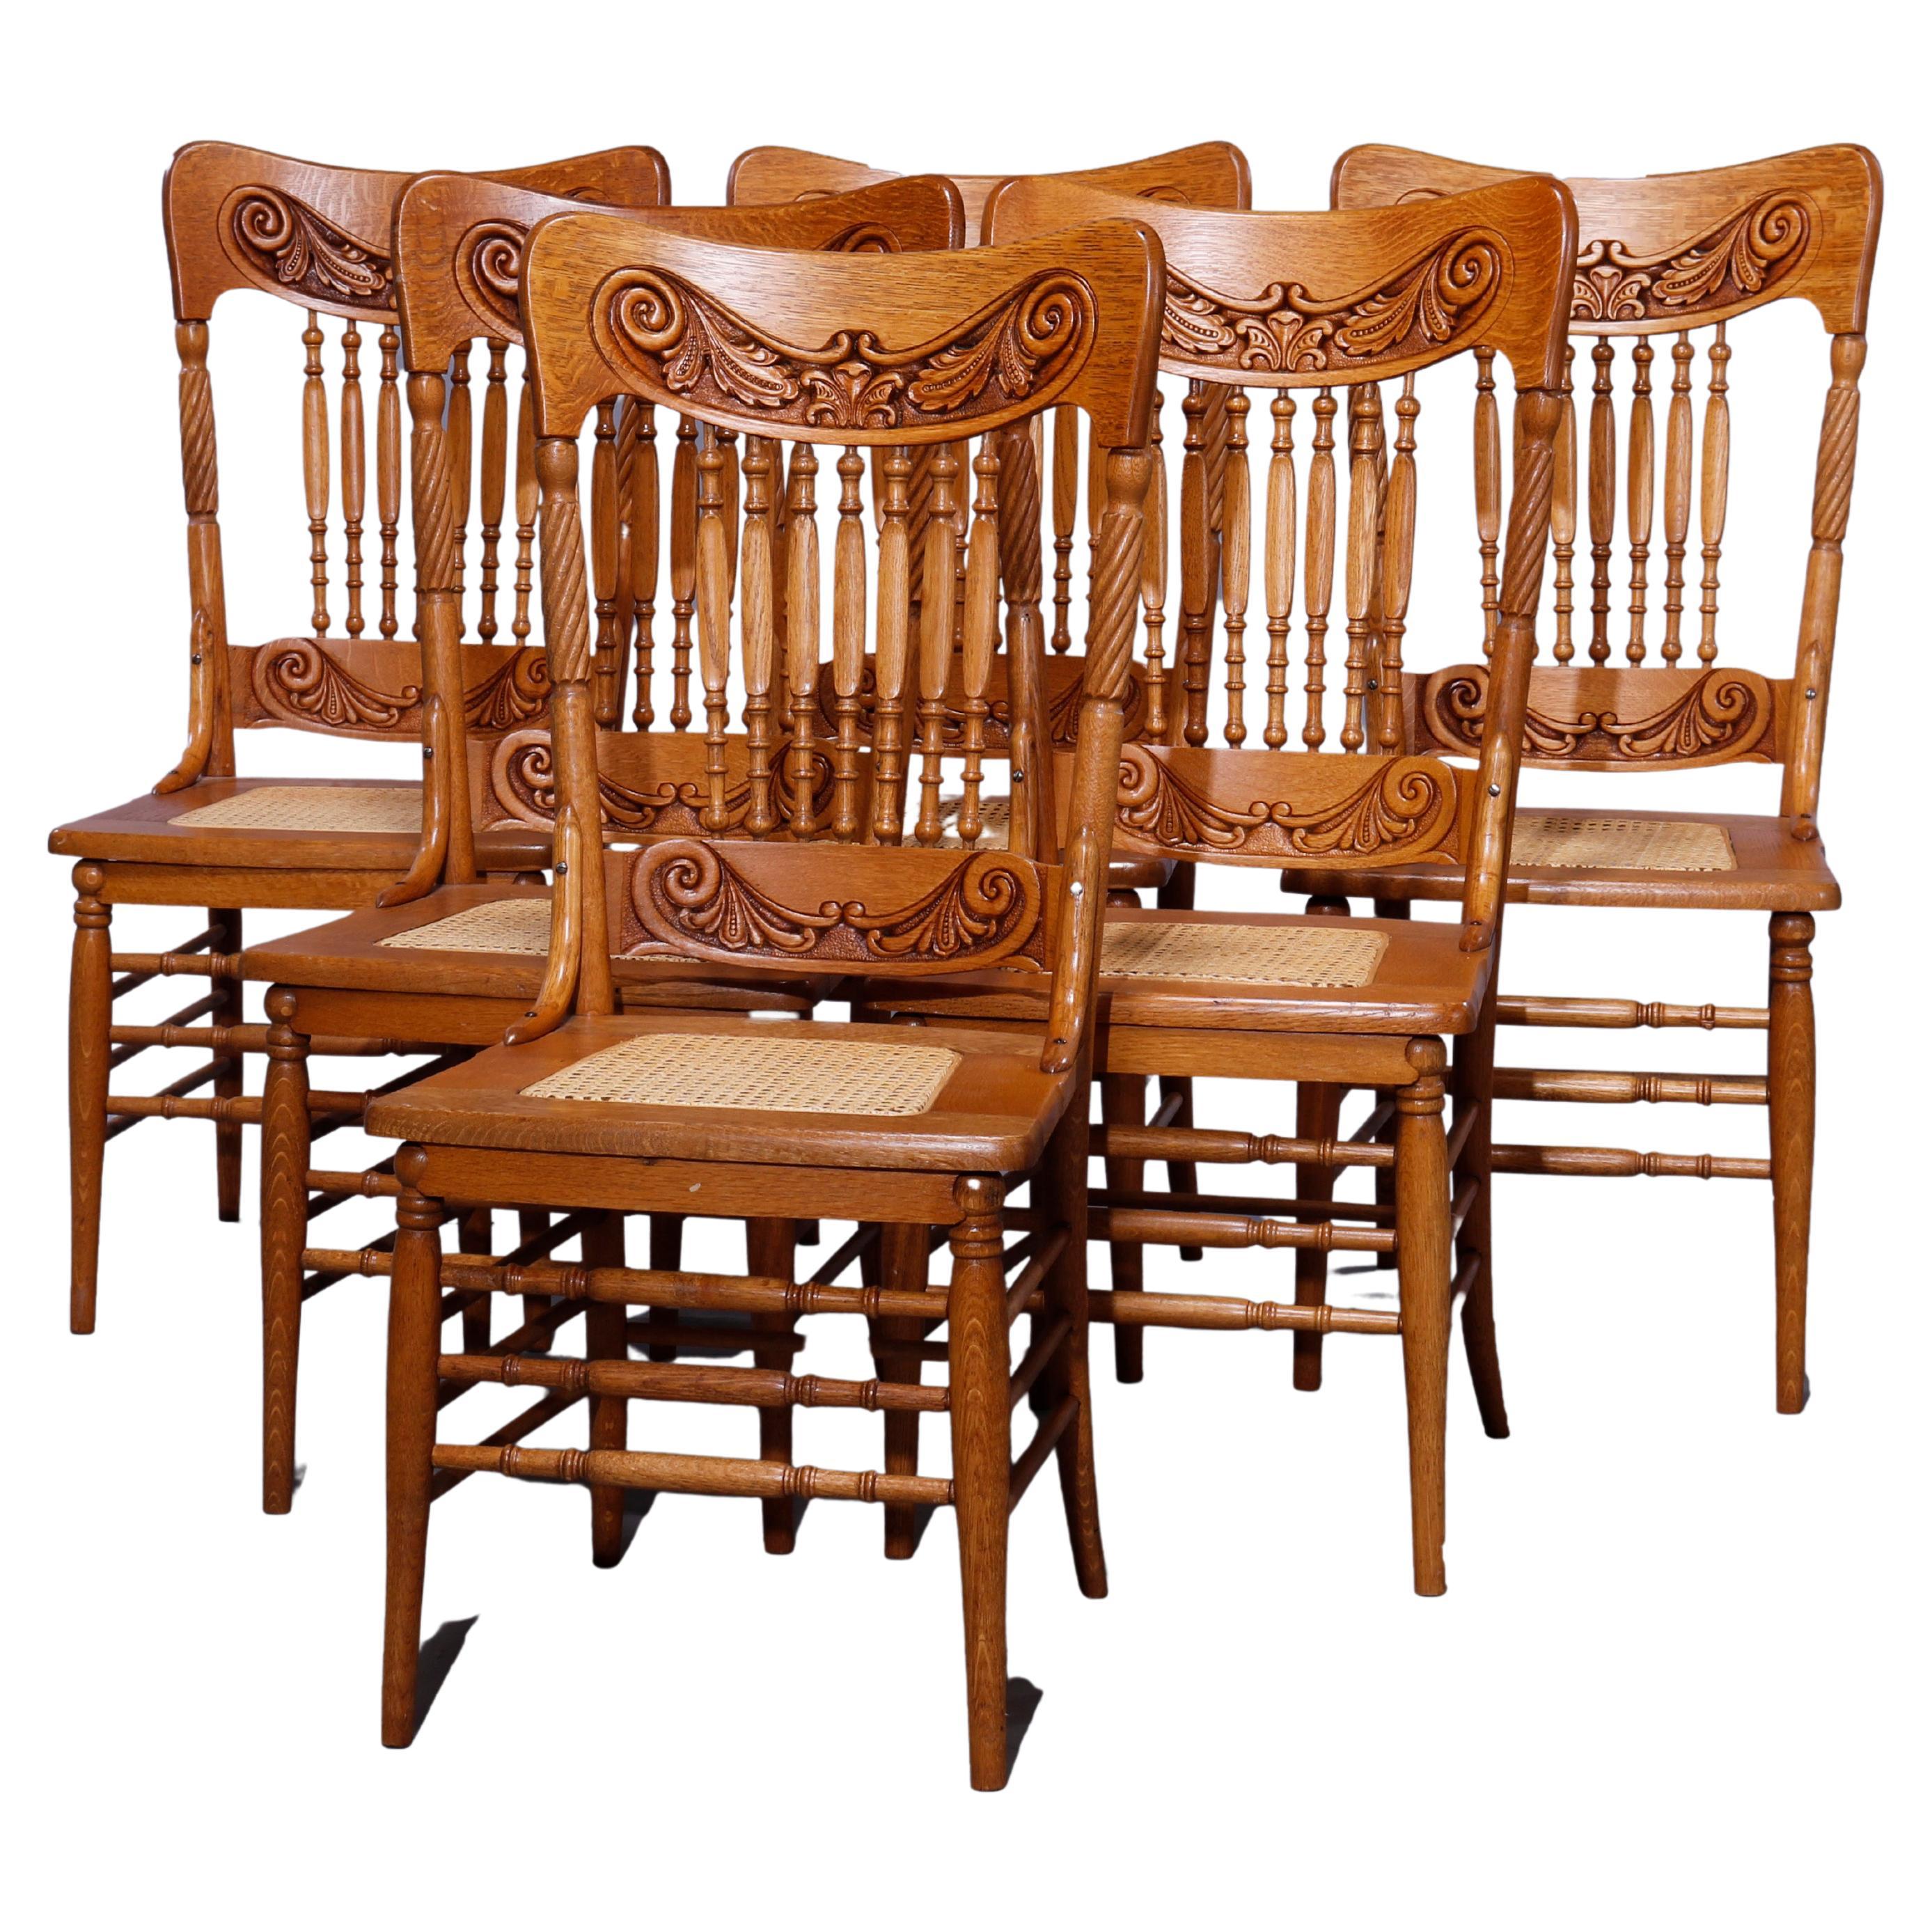 Six Antique Oak Spindle & Pressed Back Cane Seat Dining Chairs, c1910